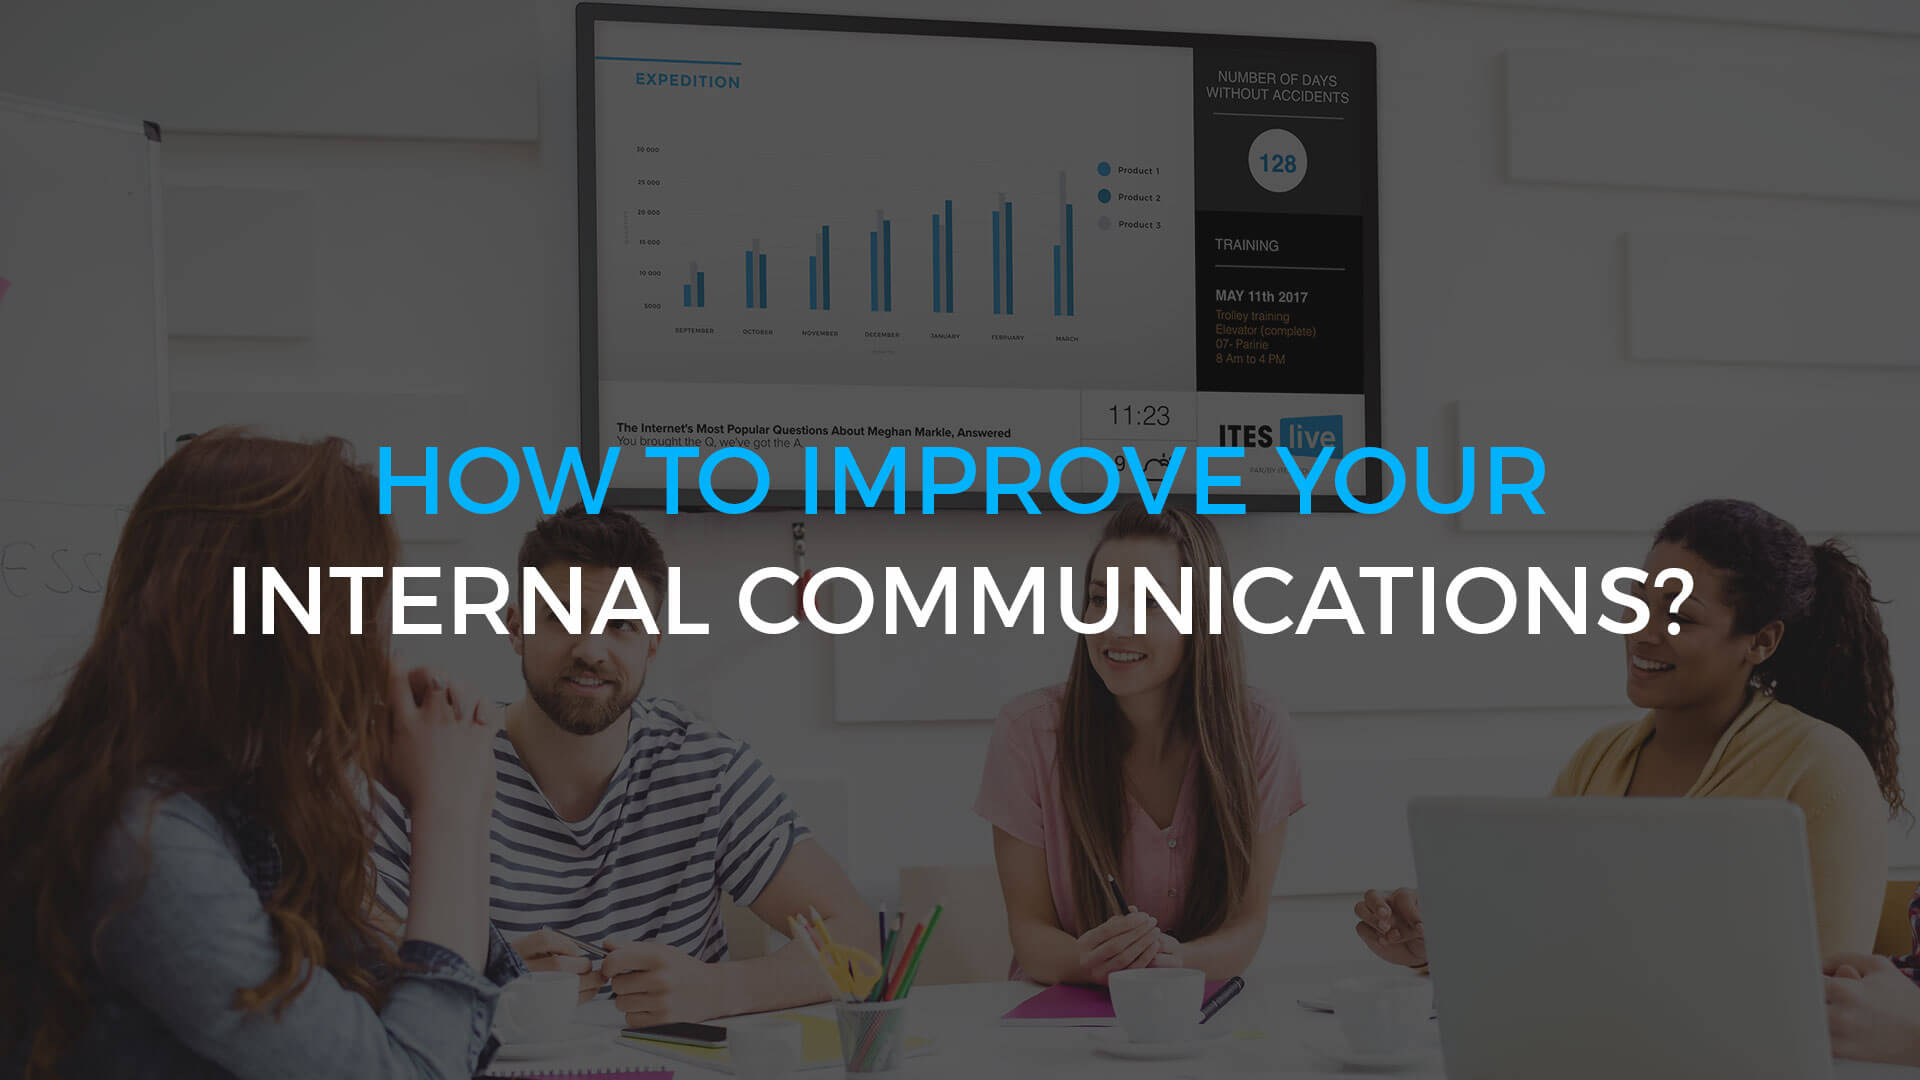 Five Types of Messages You Can Broadcast to Improve Internal Communications